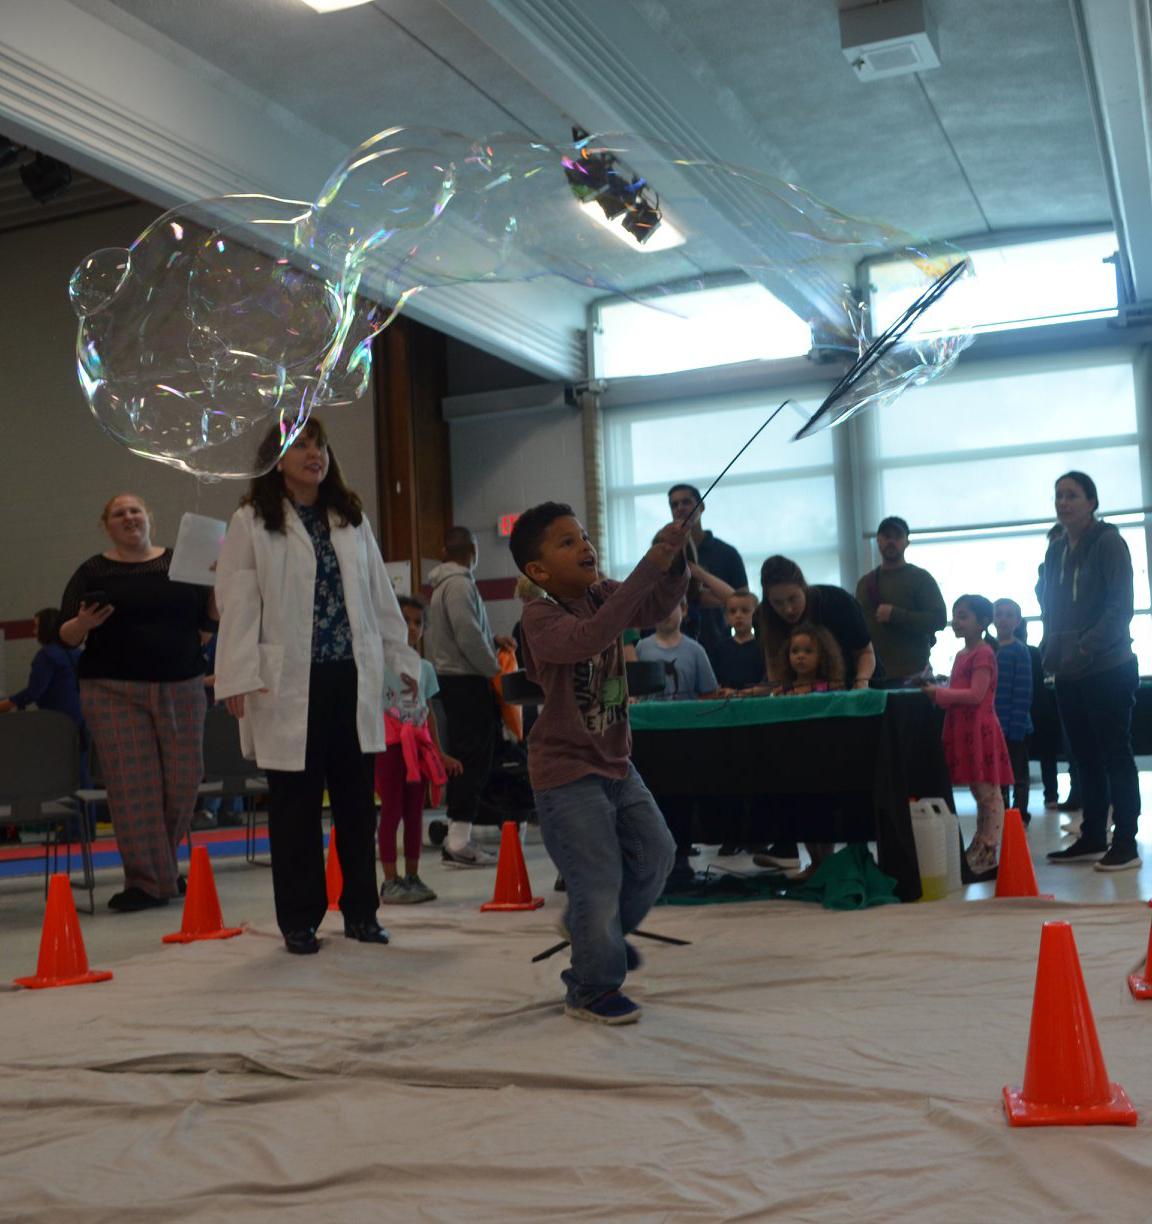 Absolute Science photo of a child using a large bubble wand at another event